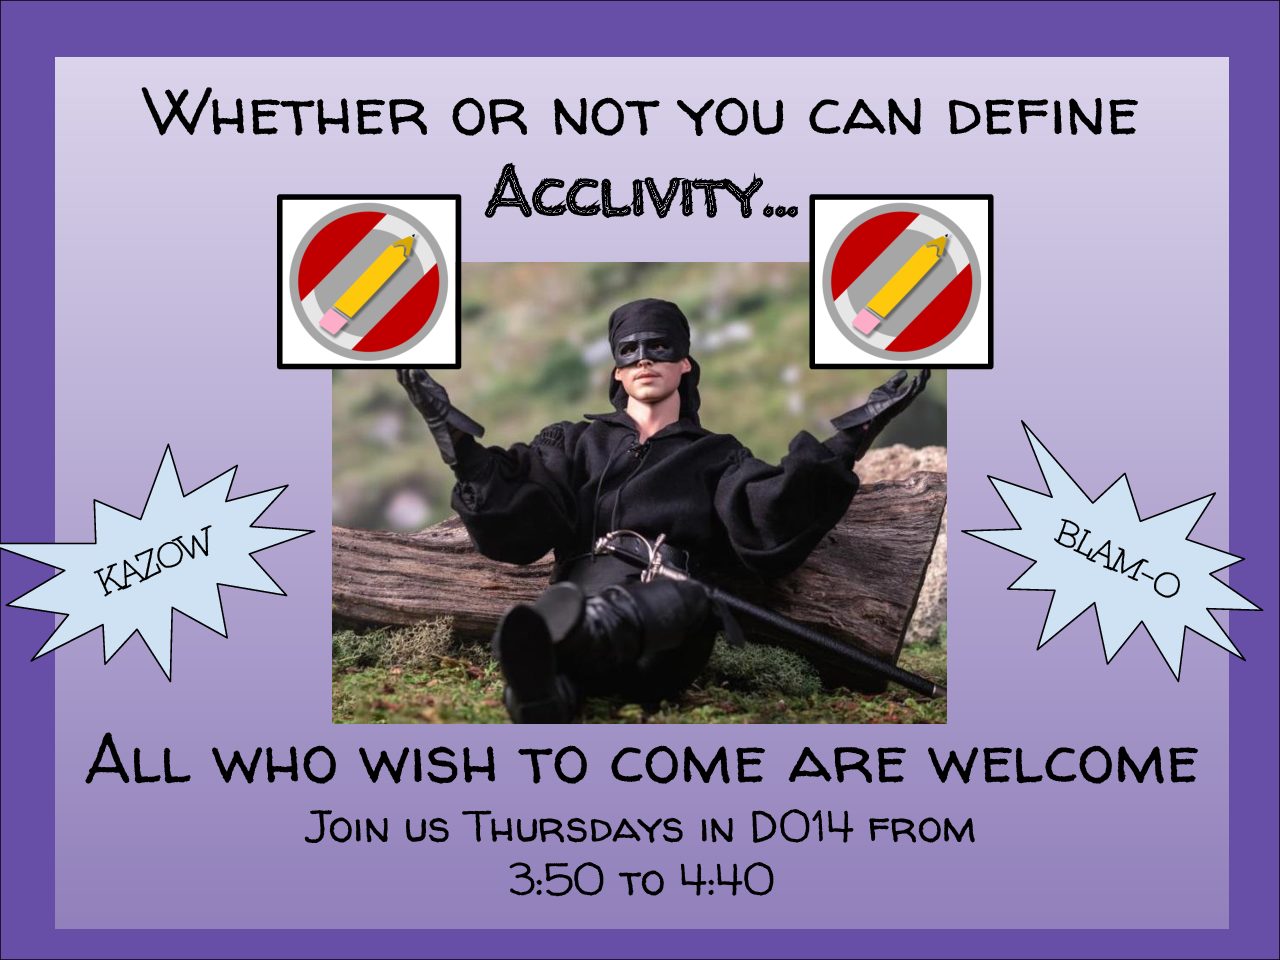 An Acclivity poster, featuring Wesley from the movie The Princess Bride.